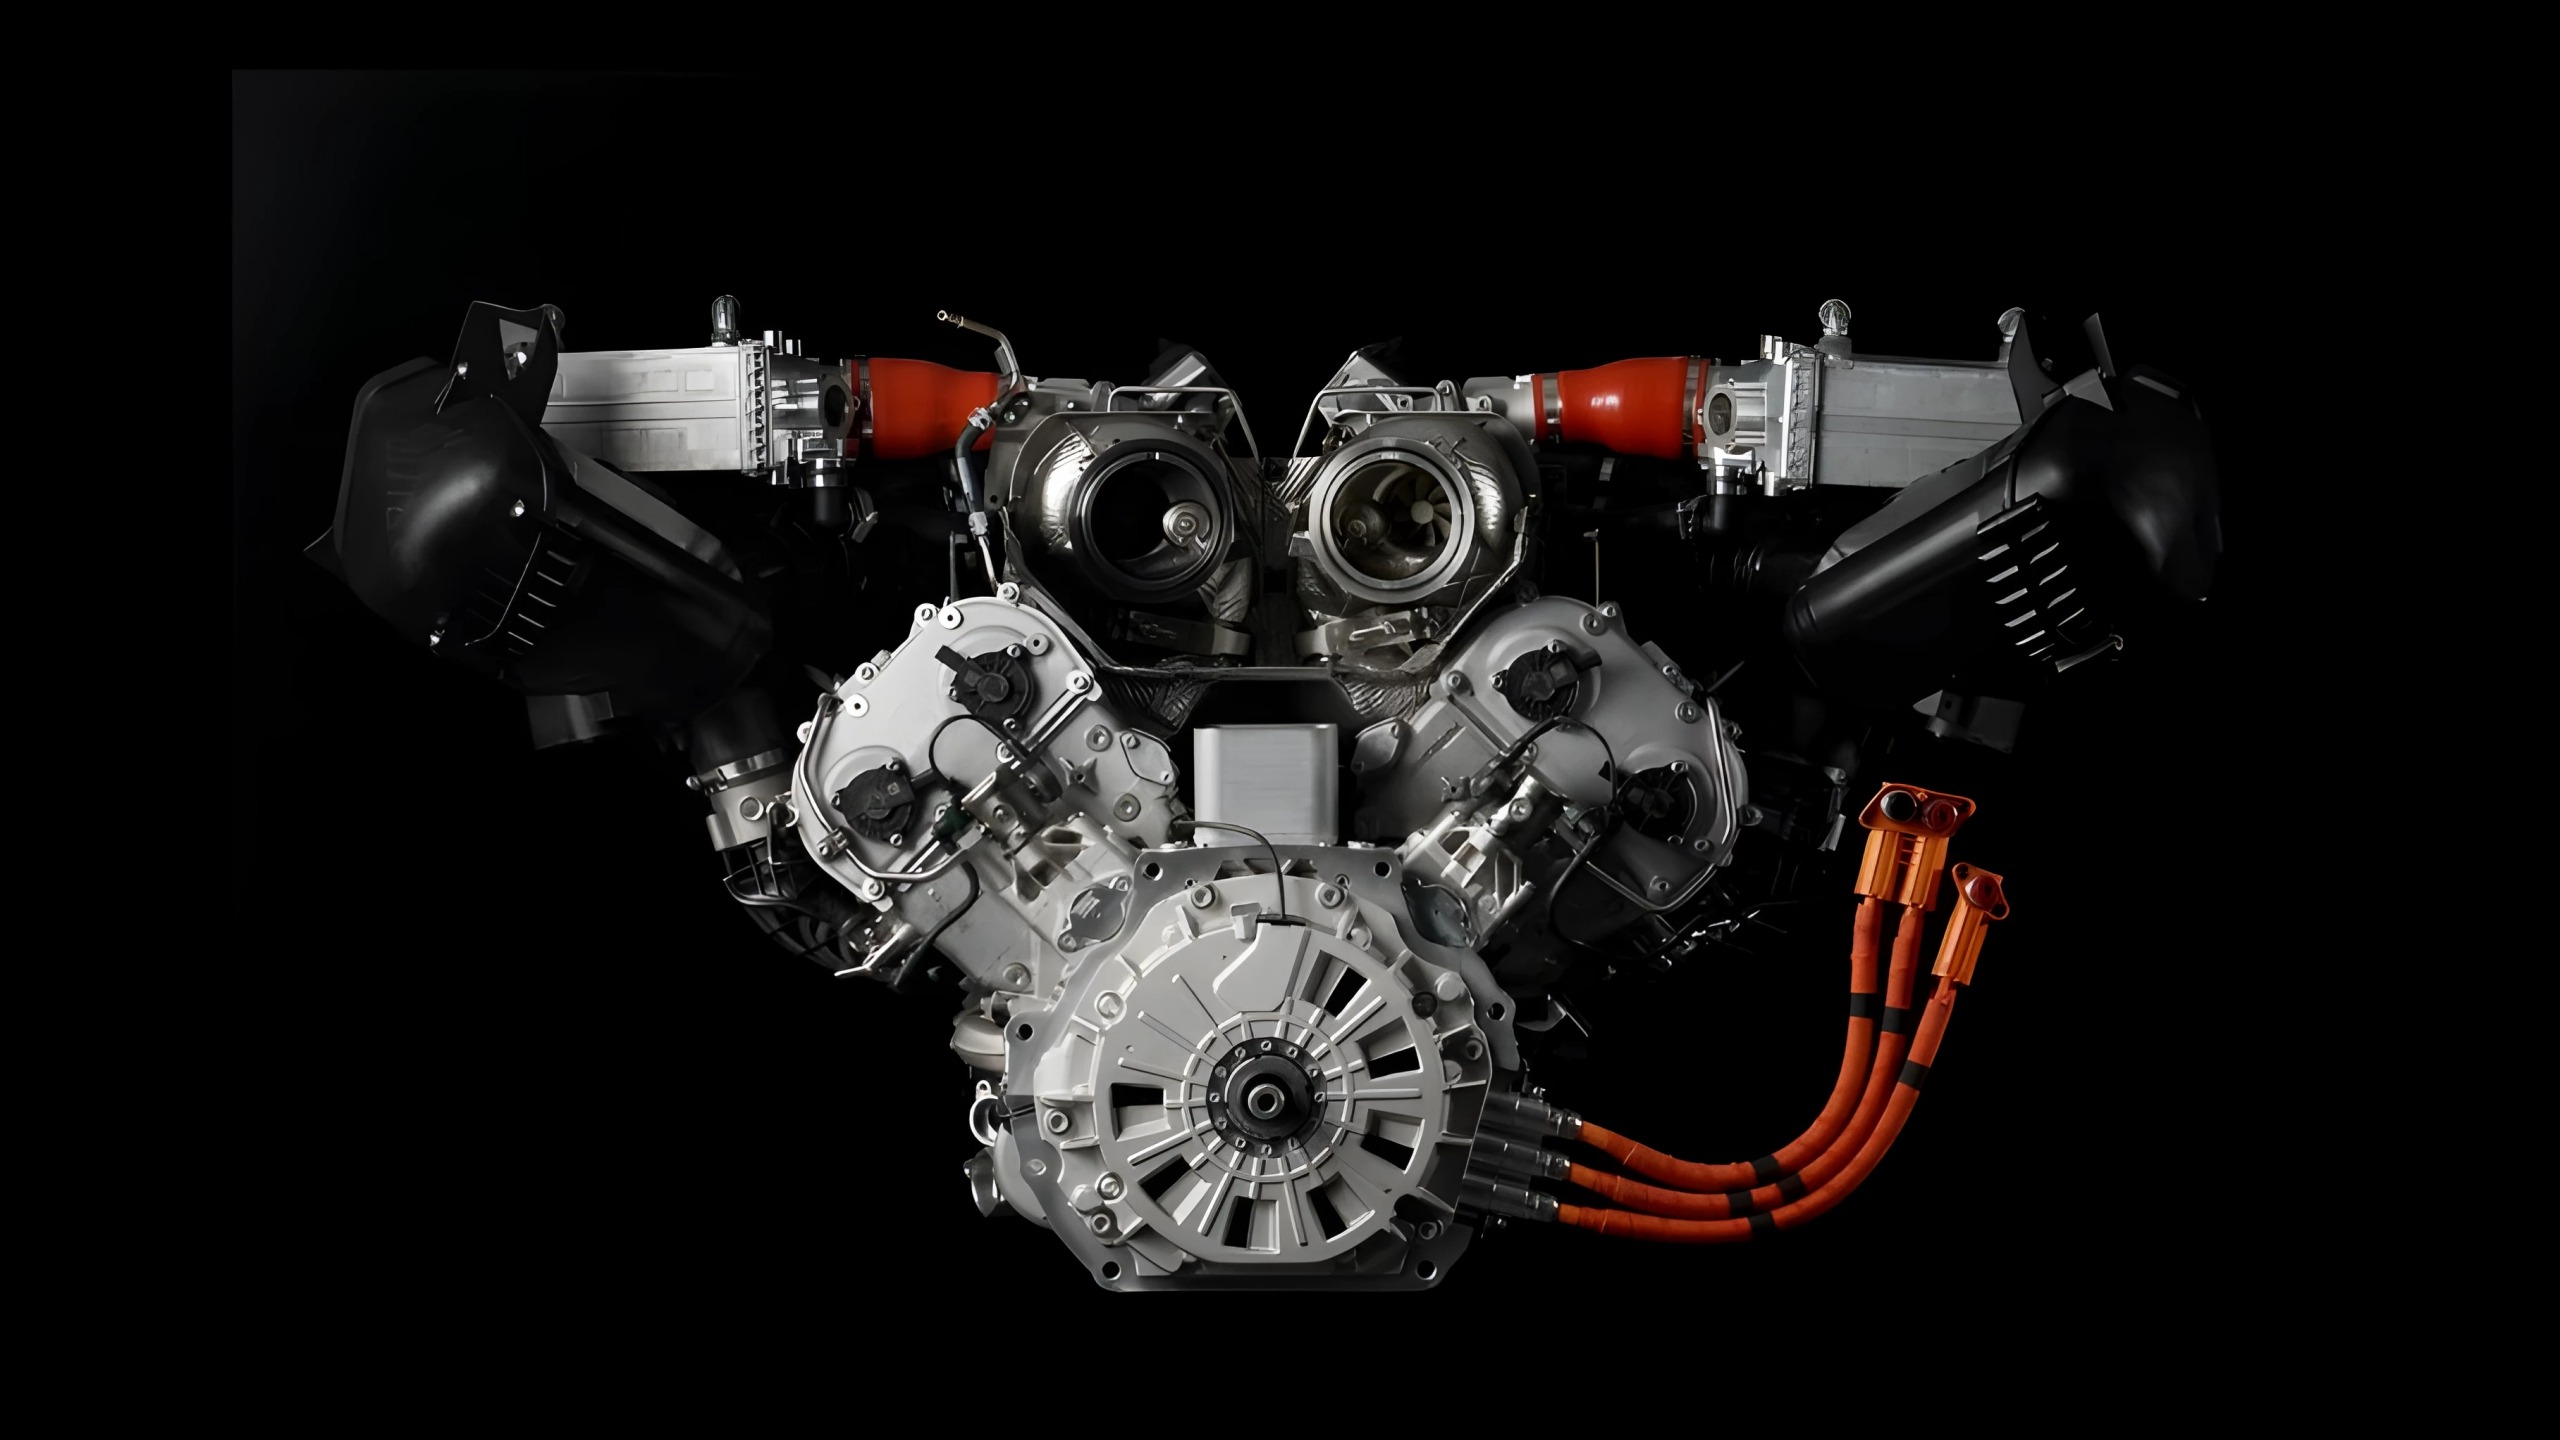 The Twin-Turbocharged 4.0 Liter V-8 That Comes With The Upcoming Lamborghini Huracán Successor